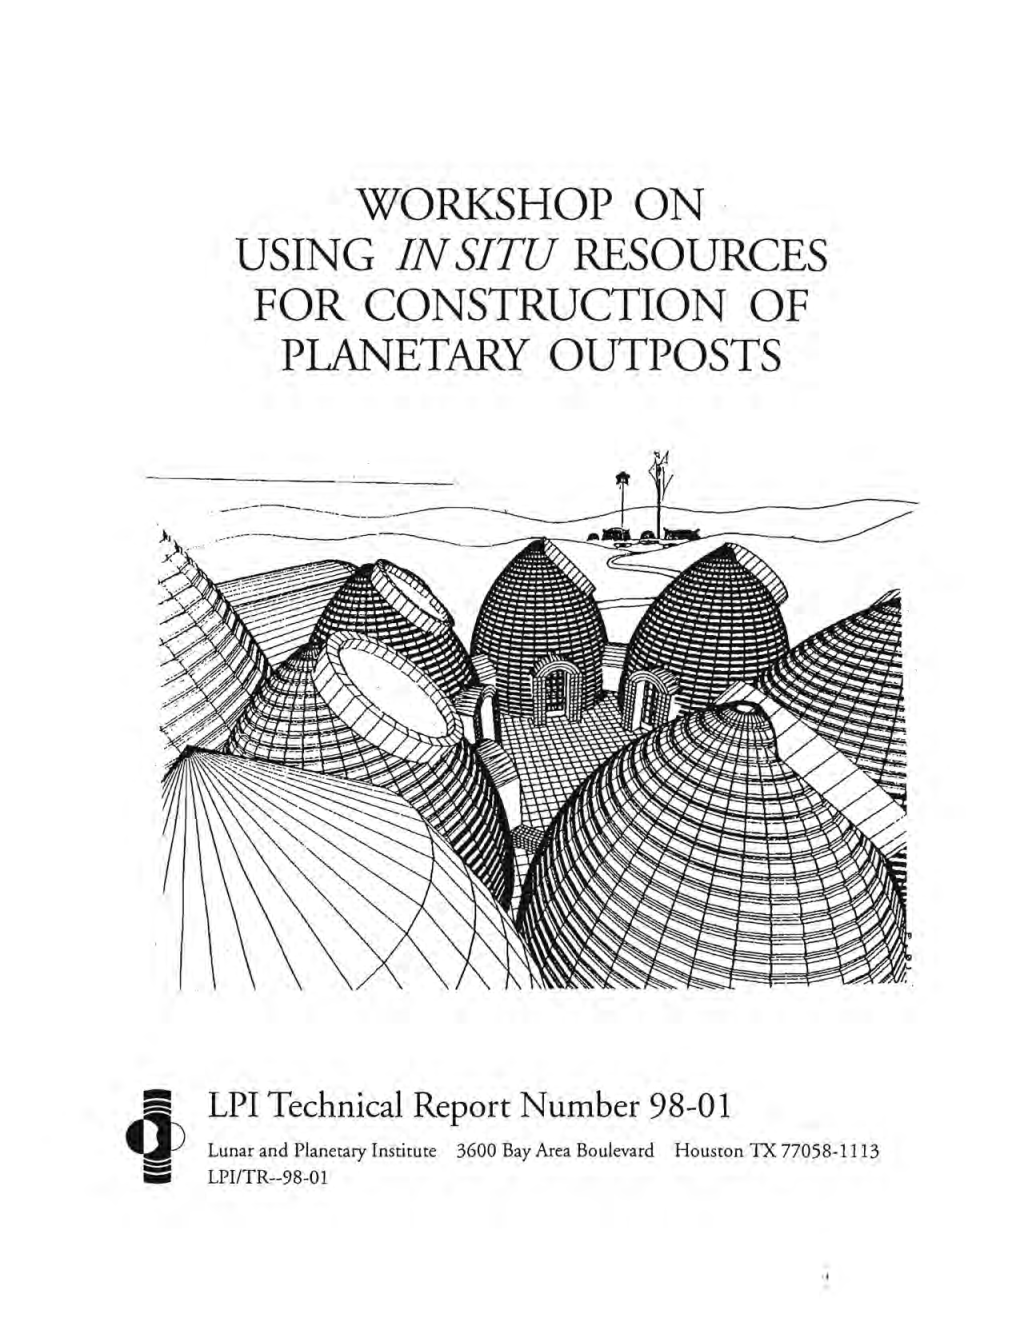 Using in Situ Resources for Construction of Planetary Outposts